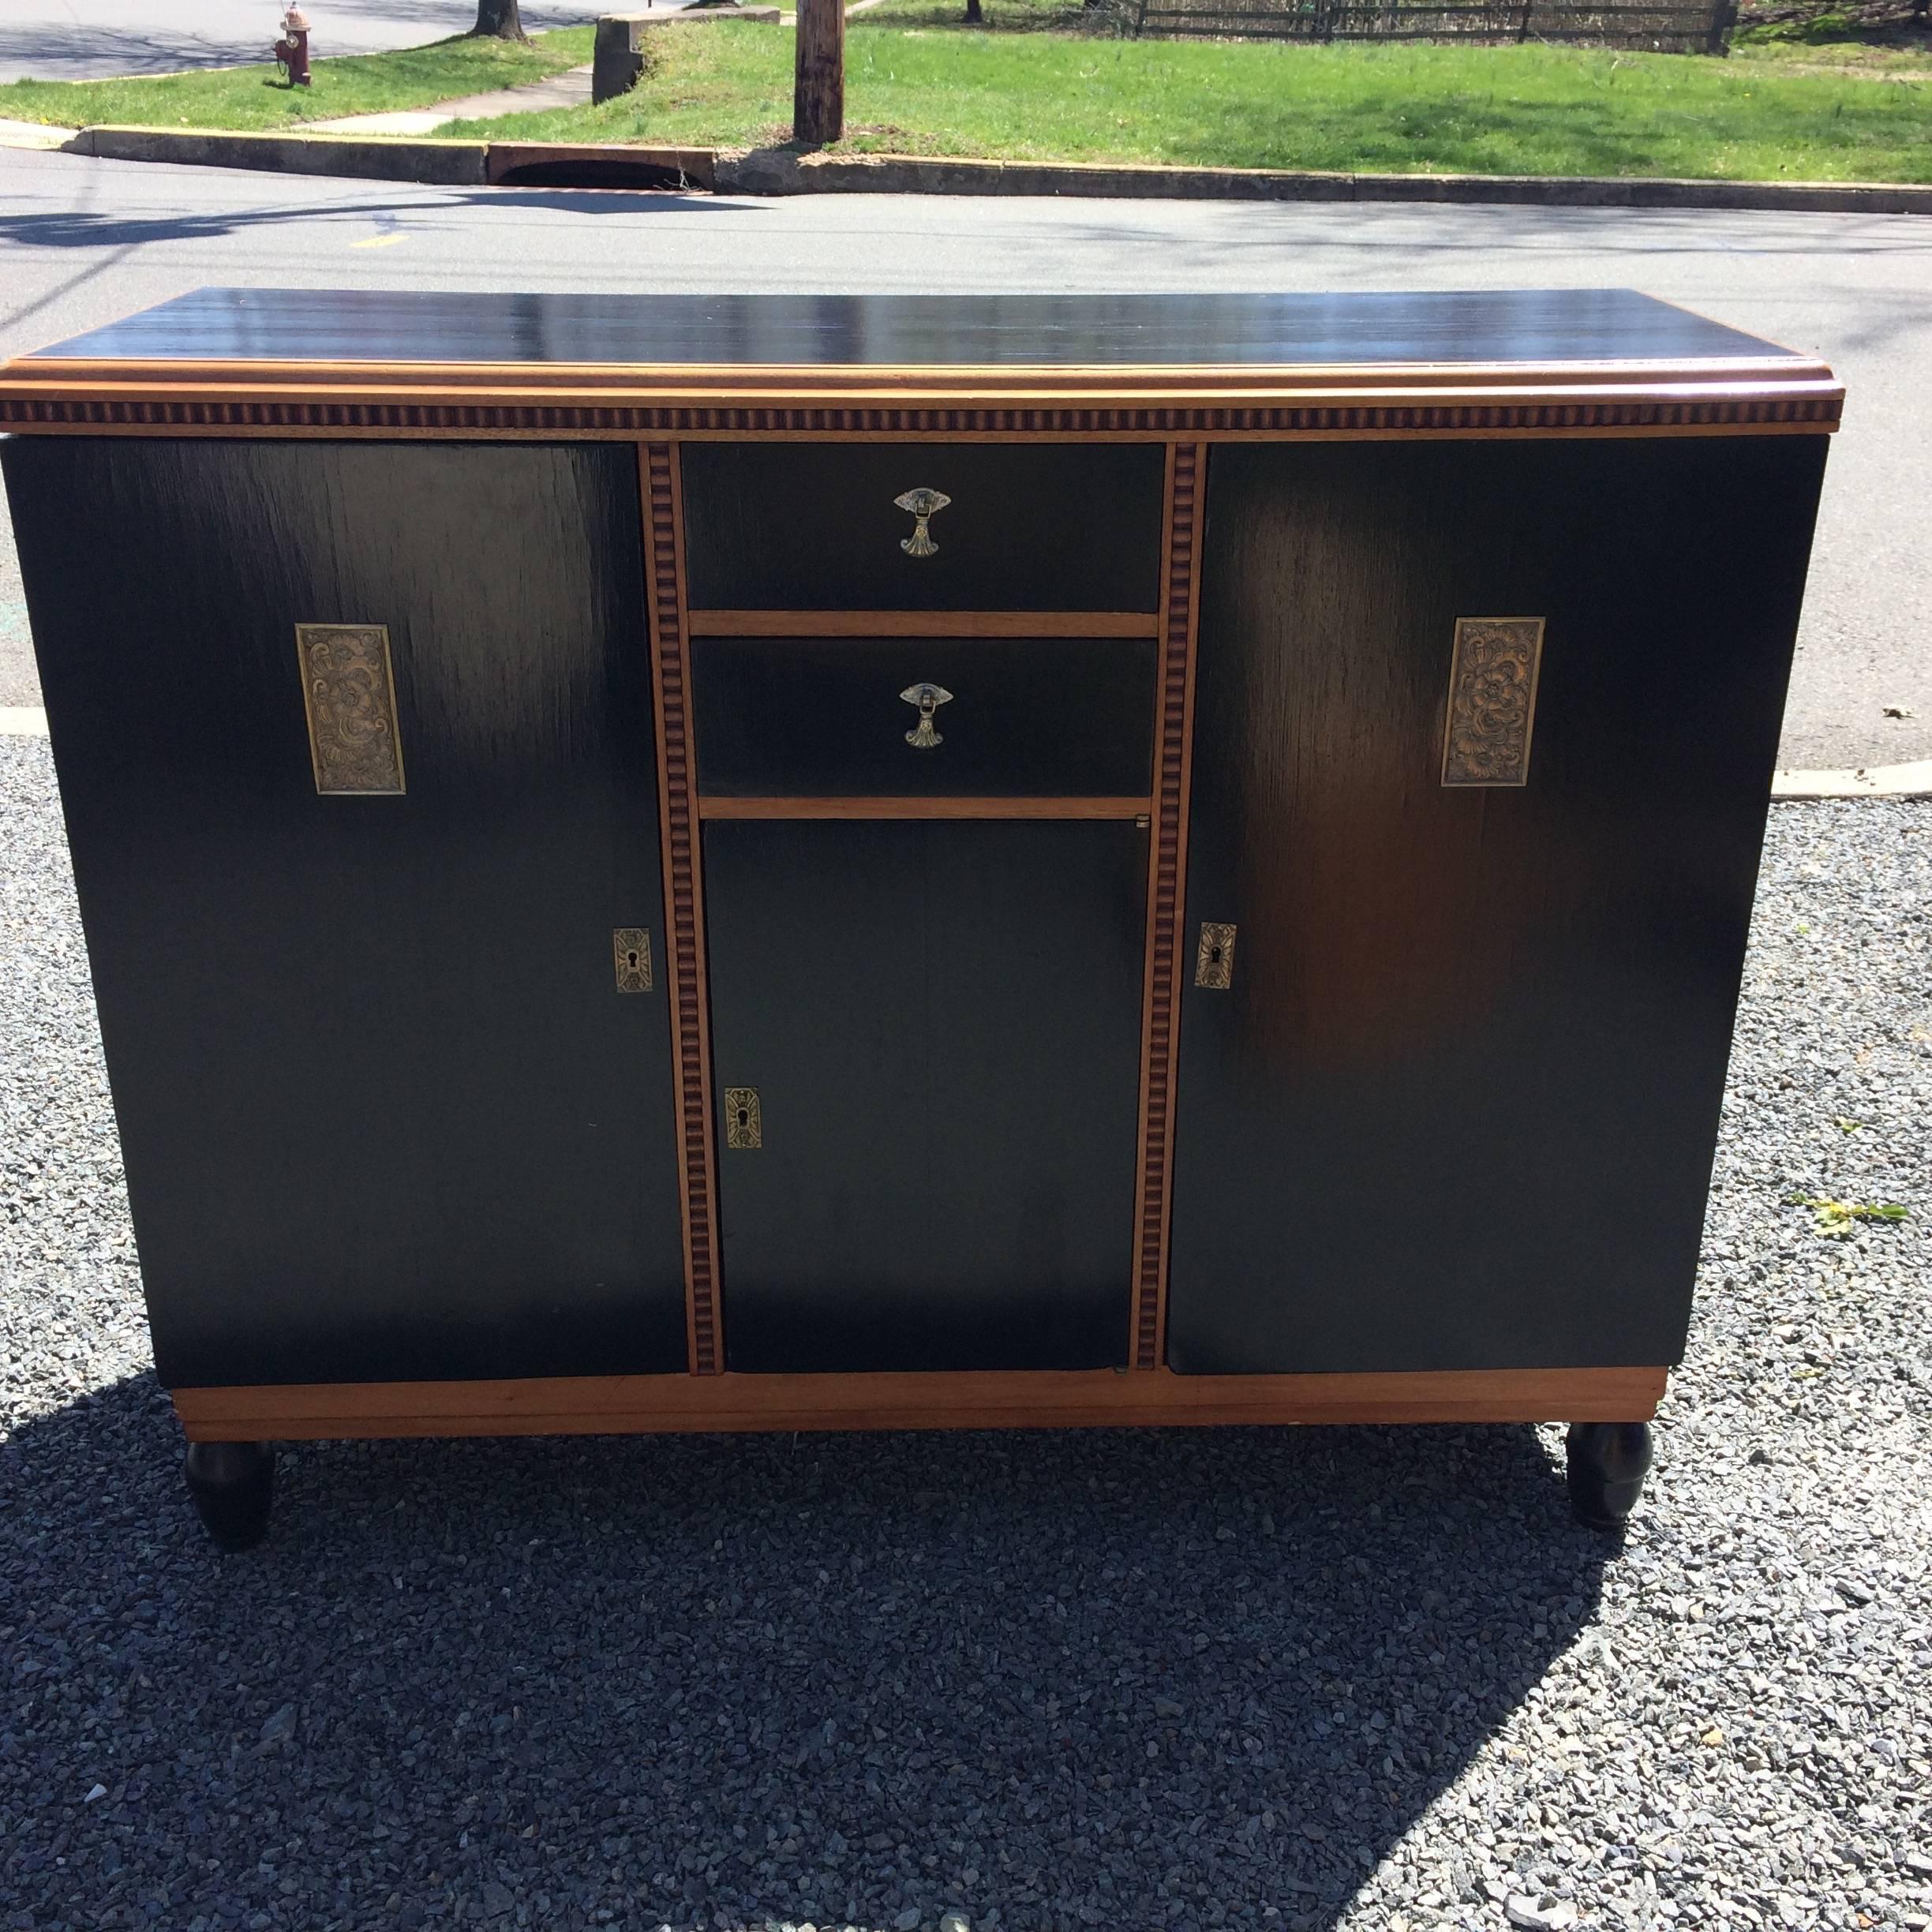 A rare vintage Art Deco style ebonized wood cabinet having contrasting carved wood detailing an charming embossed brass decoration and hardware. Two small drawers and three panel doors reveal storage inside. Has a key that opens the doors, but